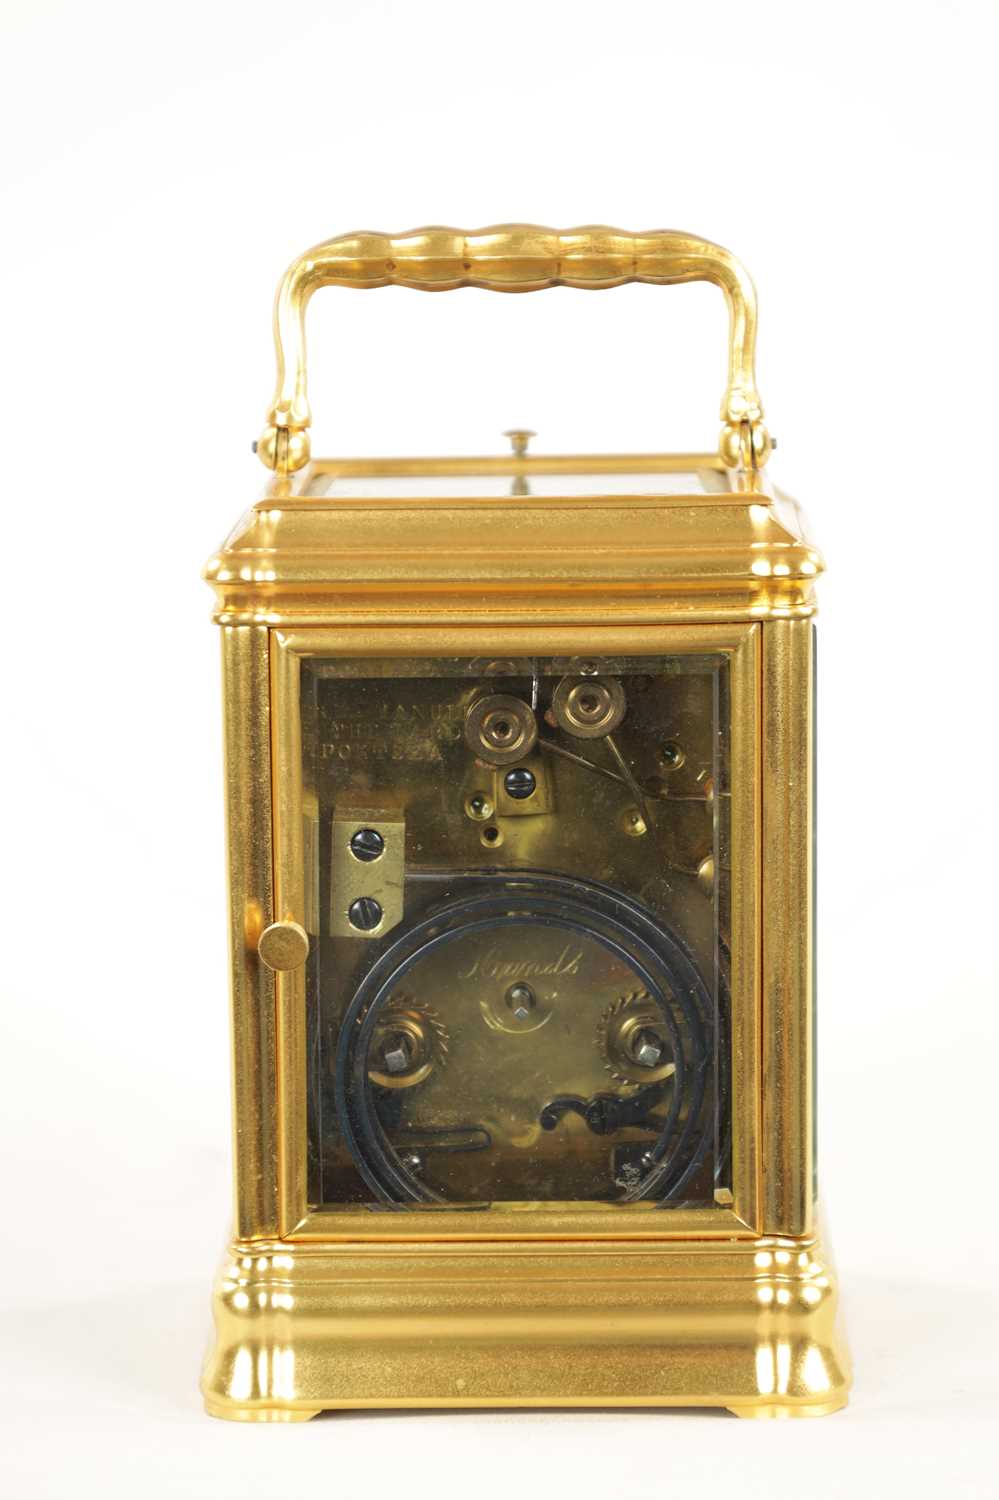 A LATE 19TH CENTURY FRENCH GORGE-CASED QUARTER CHIMING/REPEATING CARRIAGE CLOCK - Image 7 of 9